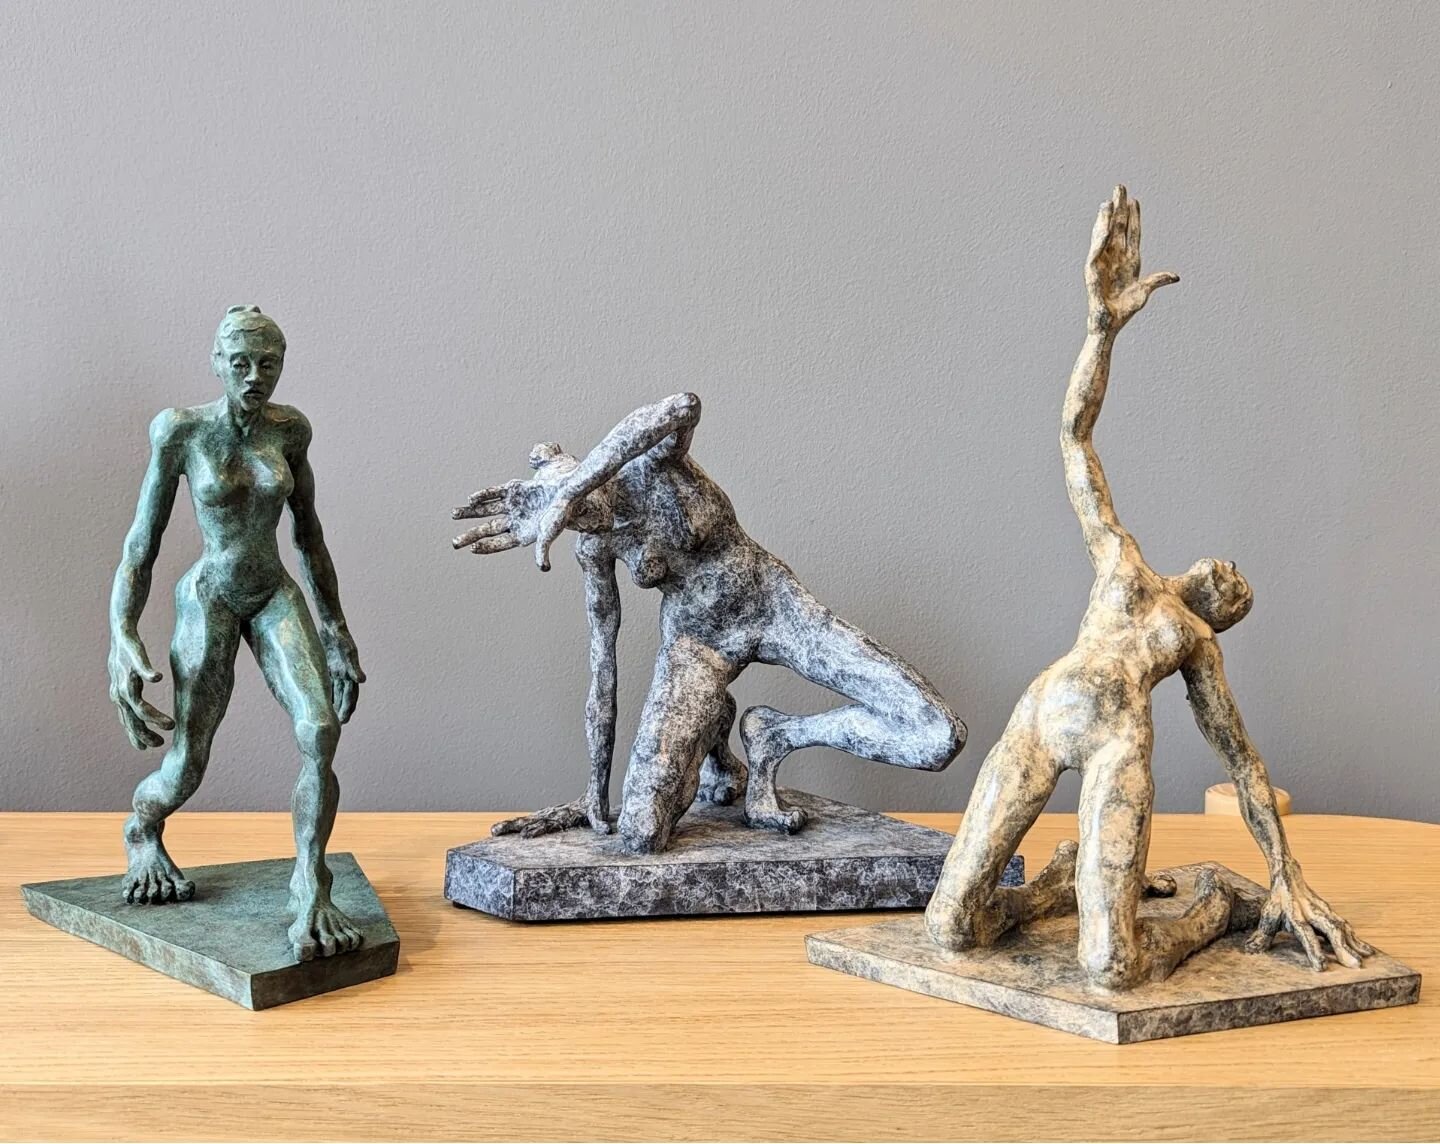 New in the gallery! ✨ 

Fantastic pieces by Isabelle Czernin @iczernin now on display in the gallery. We have been casting work for Isabelle for a number of years and love her figurative pieces which always have compelling compositions and beautiful,